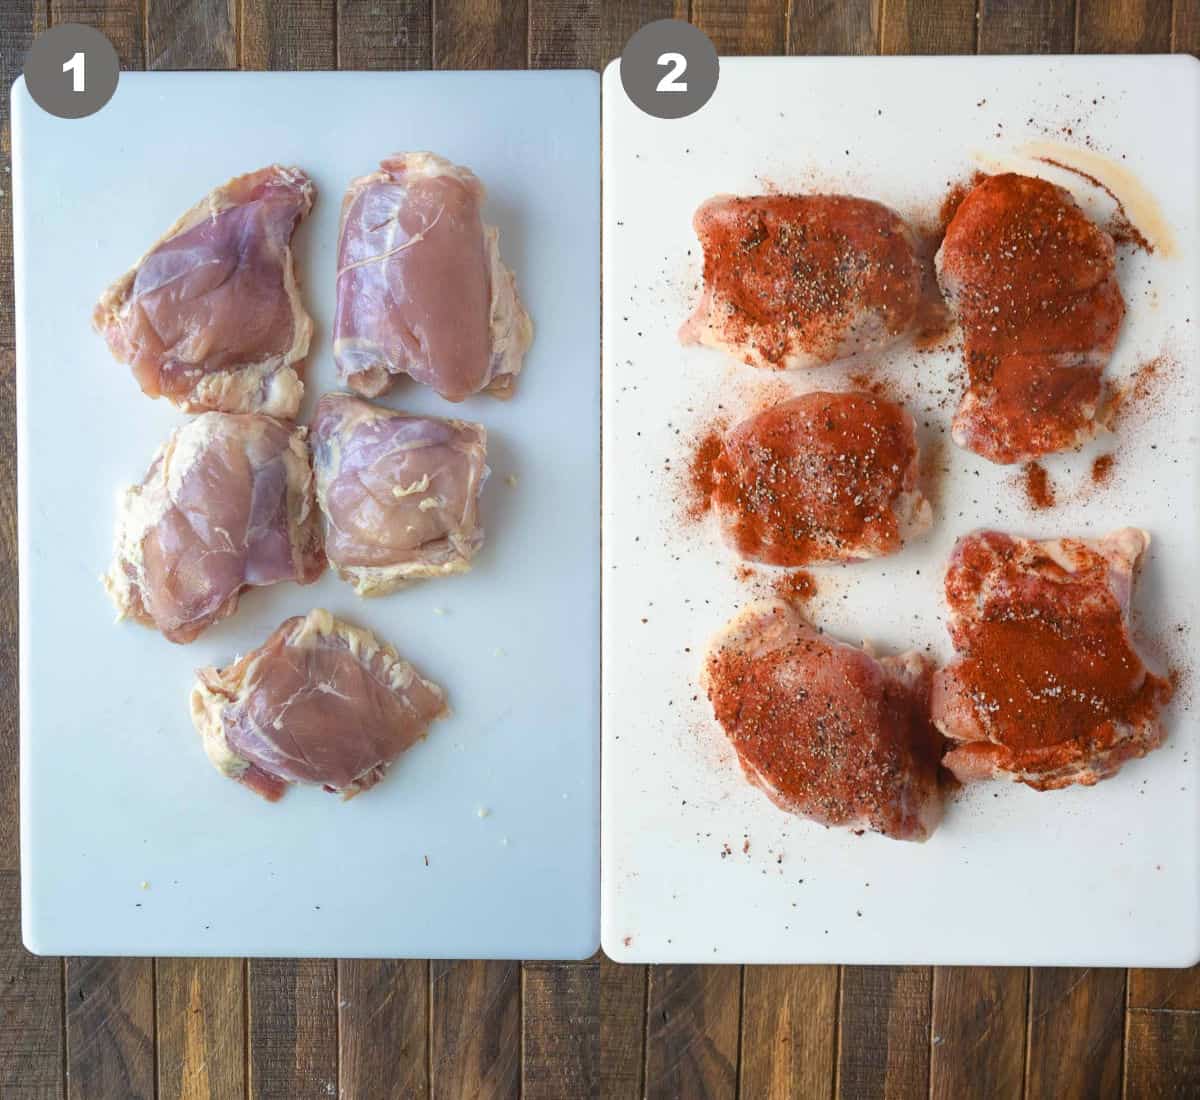 Raw chicken thighs on a cutting board then spices sprinkled on top.